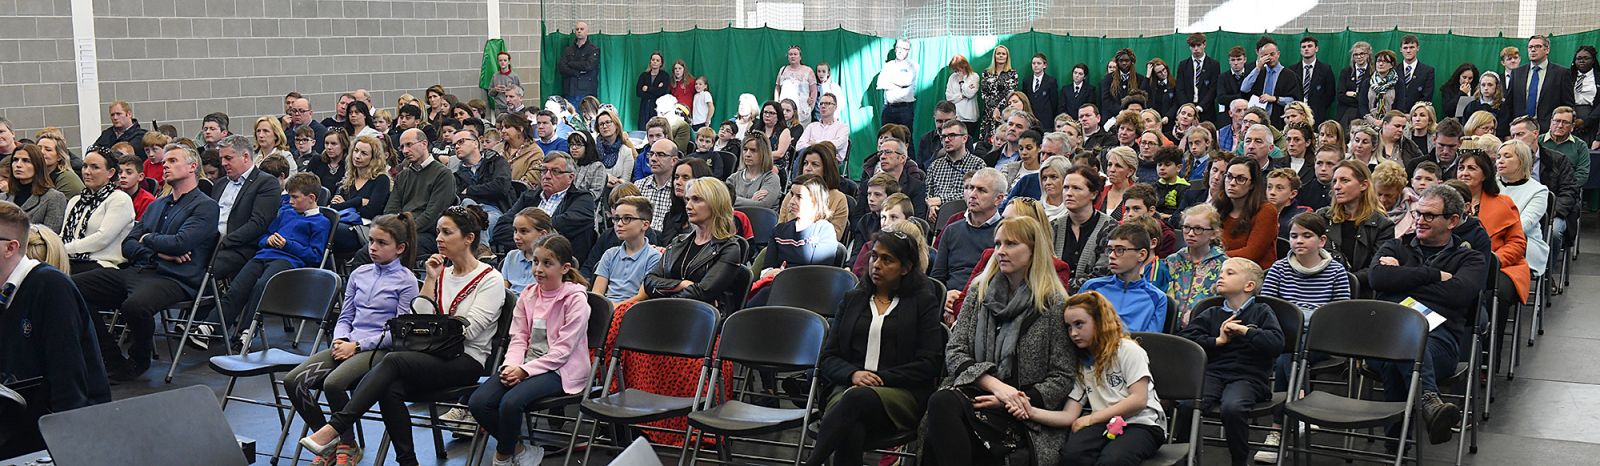 Part of the large attendance at the Dundalk Grammar School Open Day. Picture Ken Finegan/Newspics